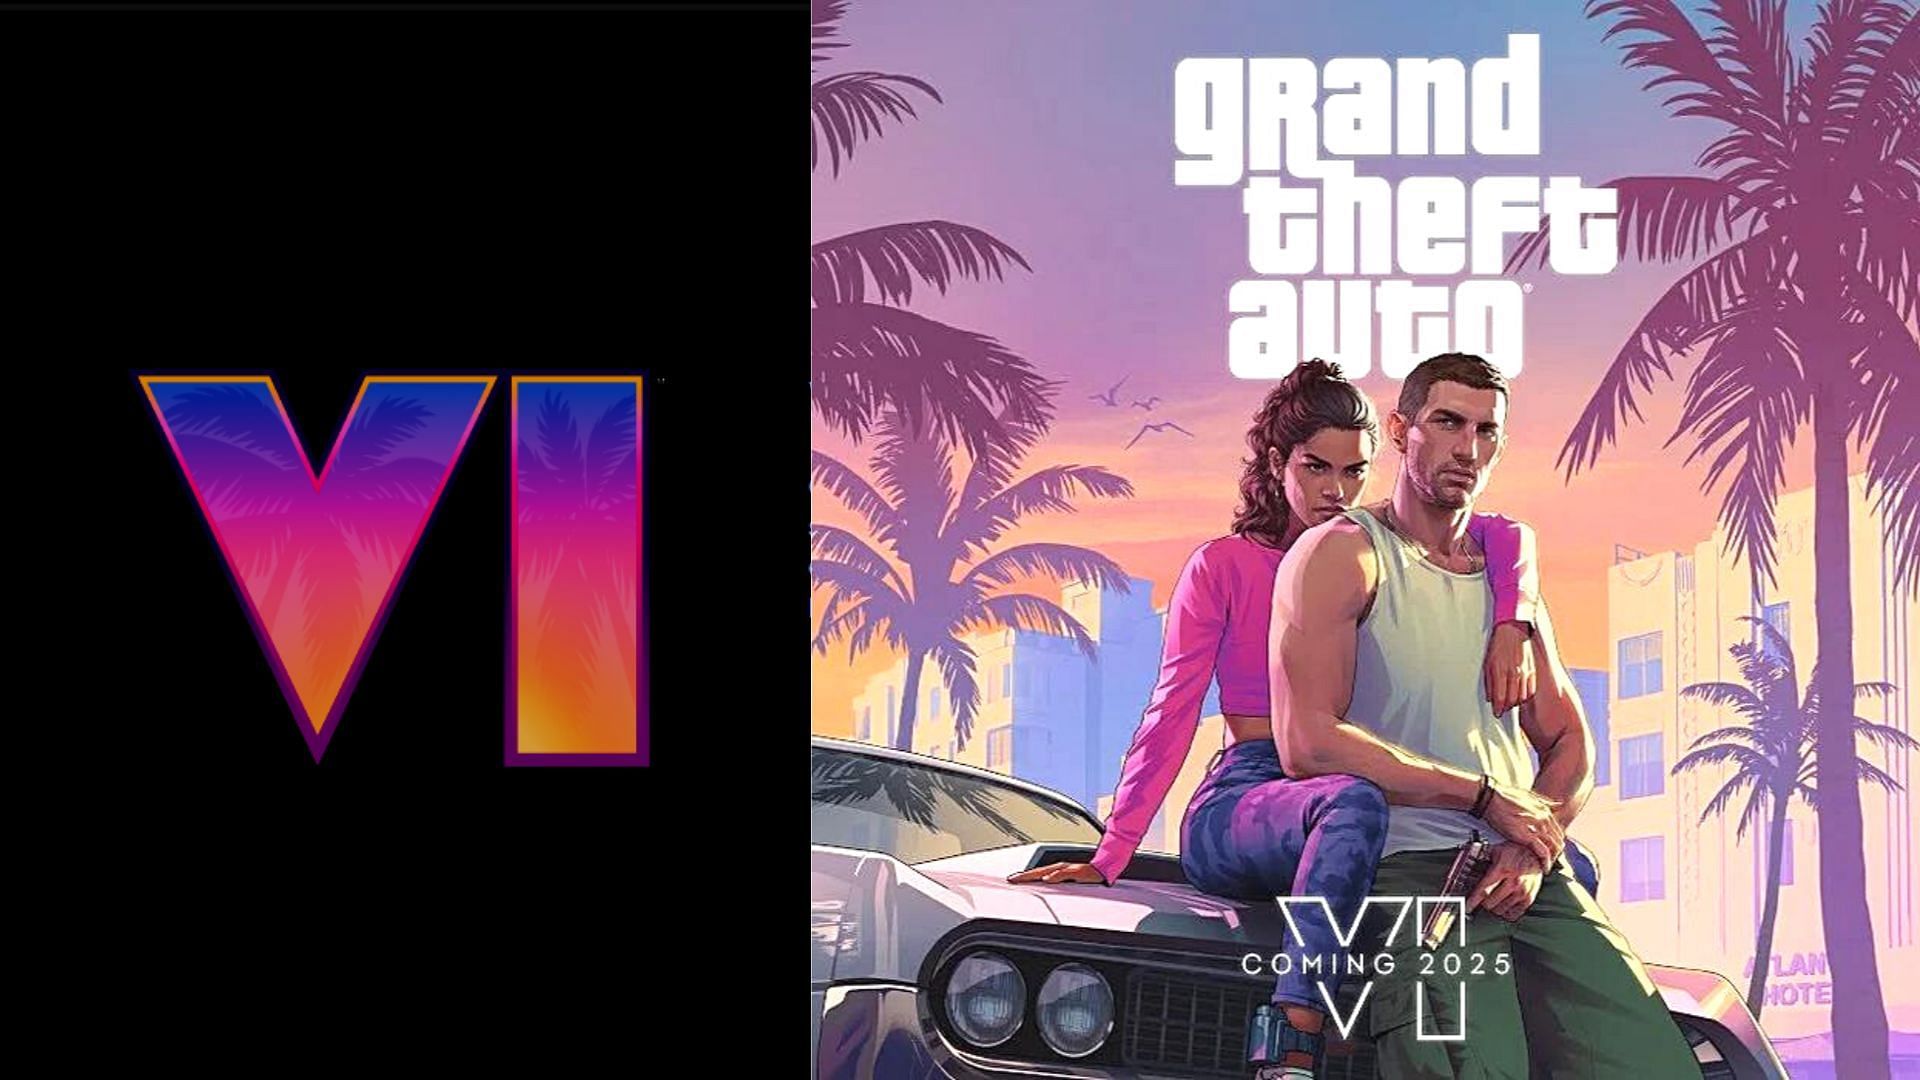 Is the GTA 6 Trailer the Most-Viewed  Video in 24 Hours?